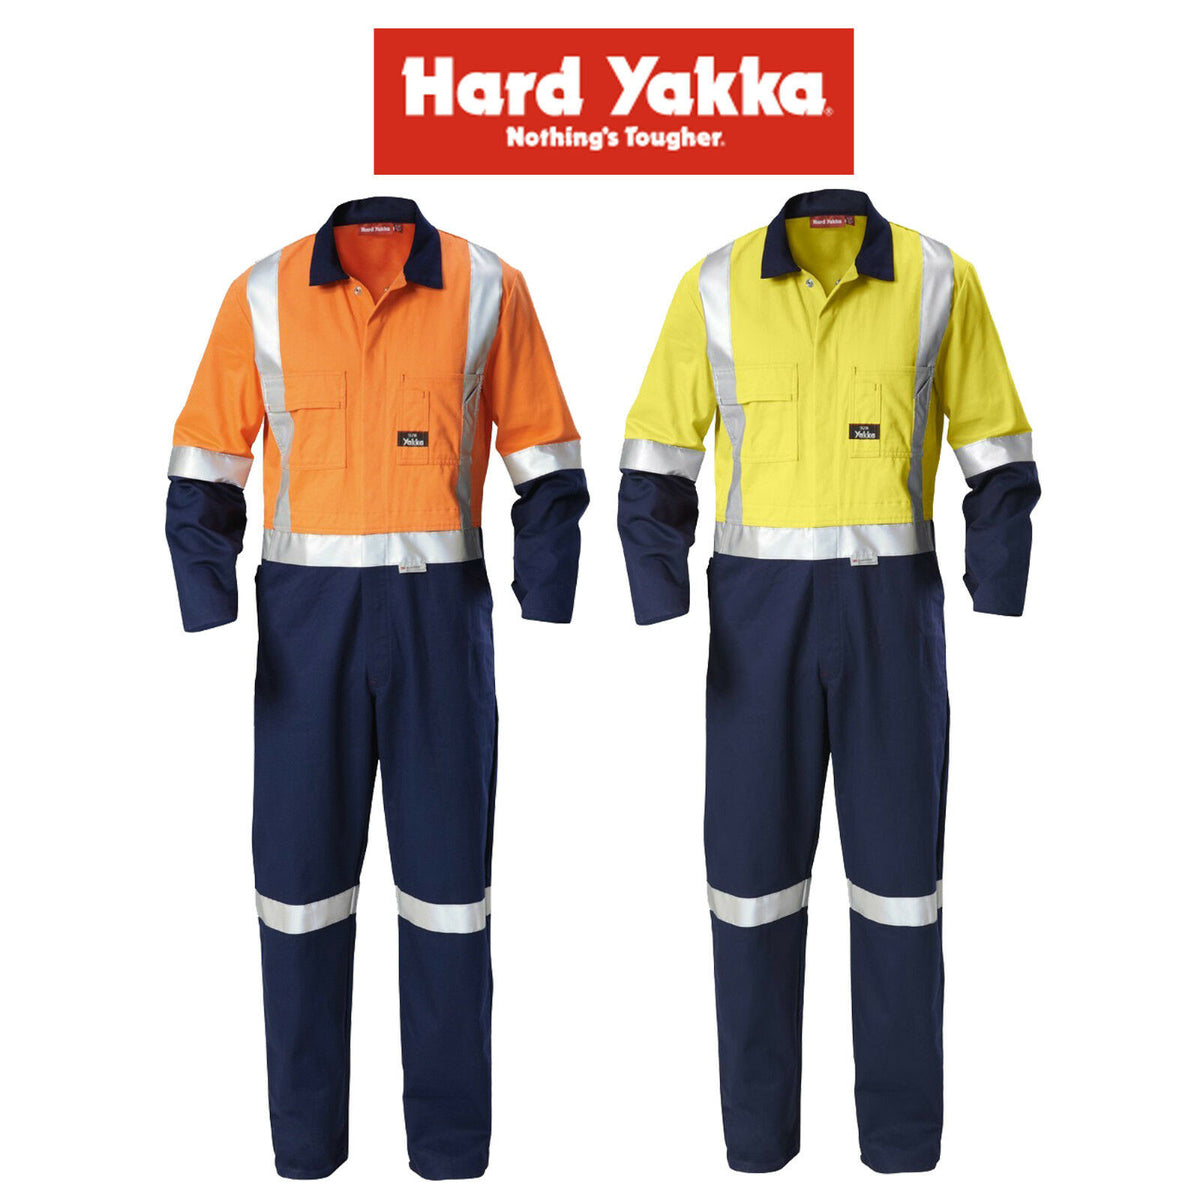 Mens Hard Yakka Hi-Vis Taped Cotton Safety Coverall Overalls Workwear Y00262